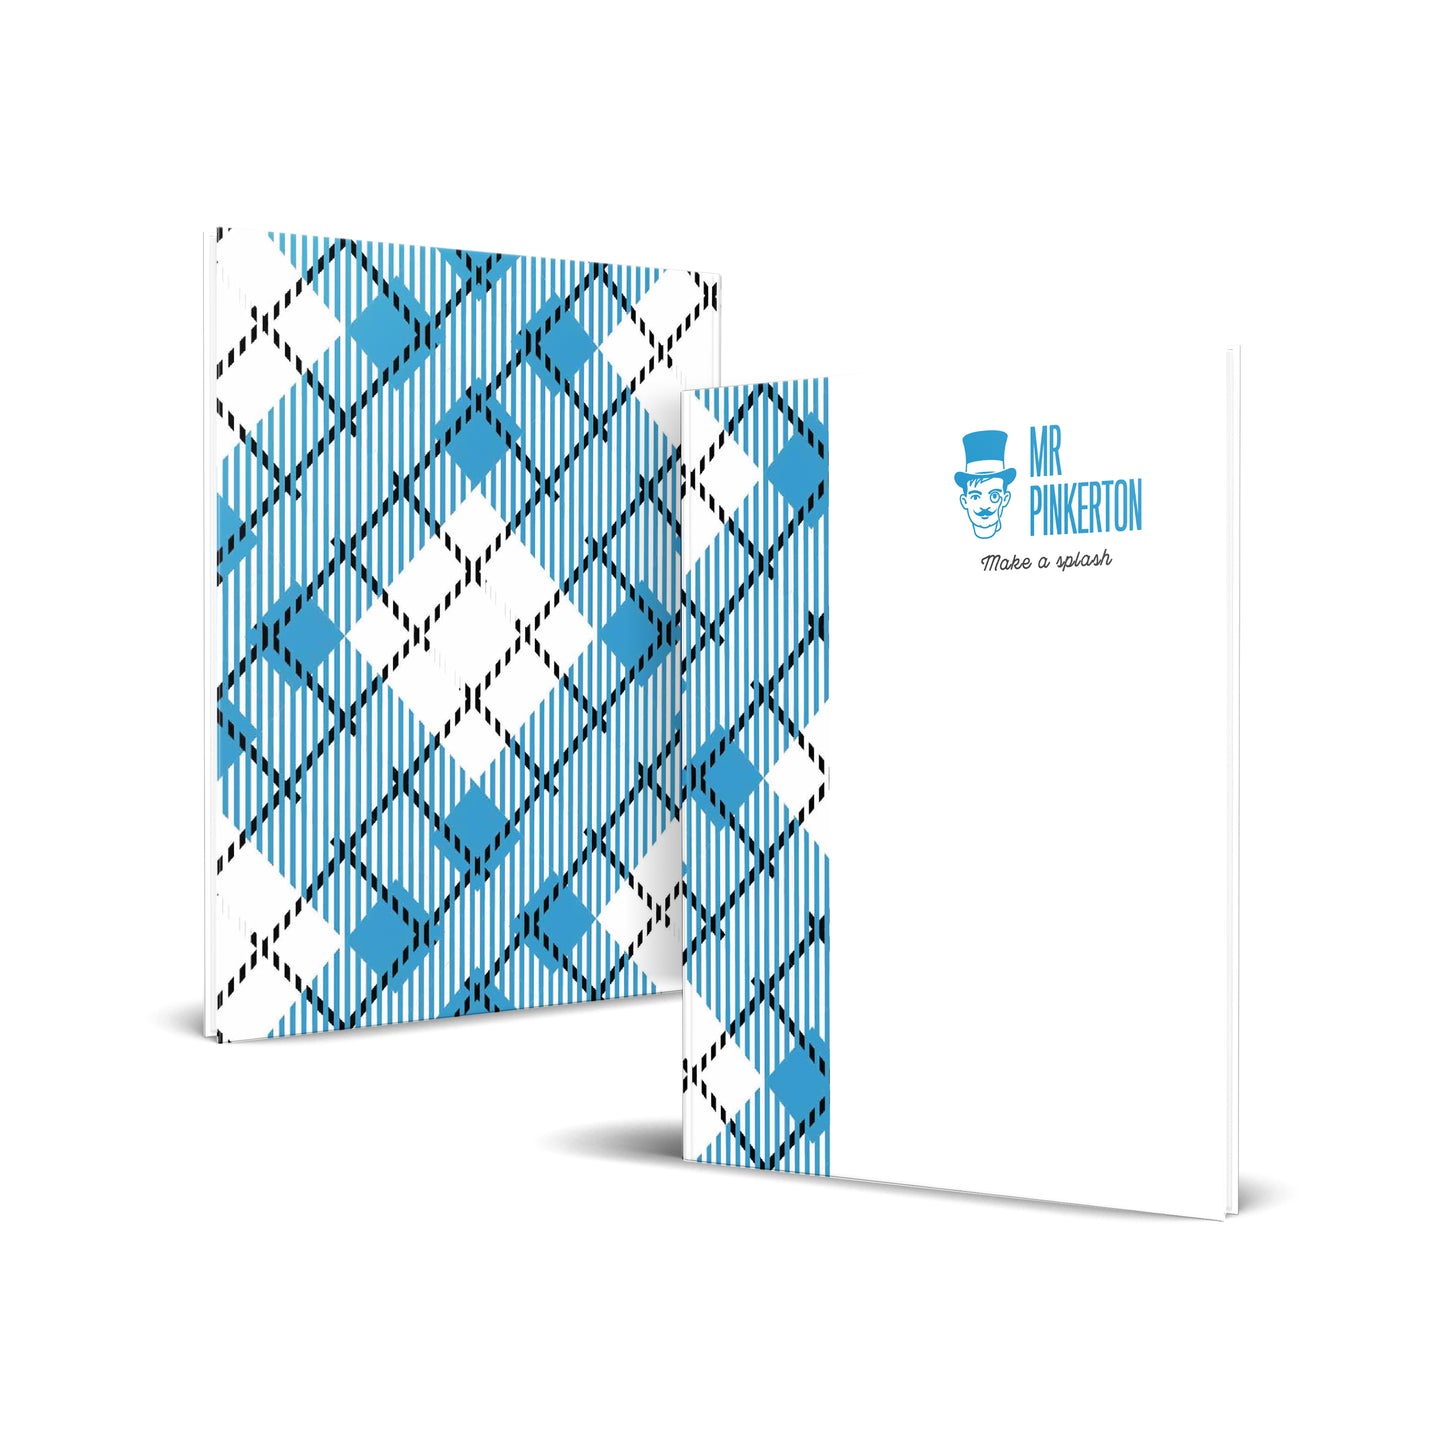 Full Color Customized Hardcover Binders (from as low as $10.46 per cover)